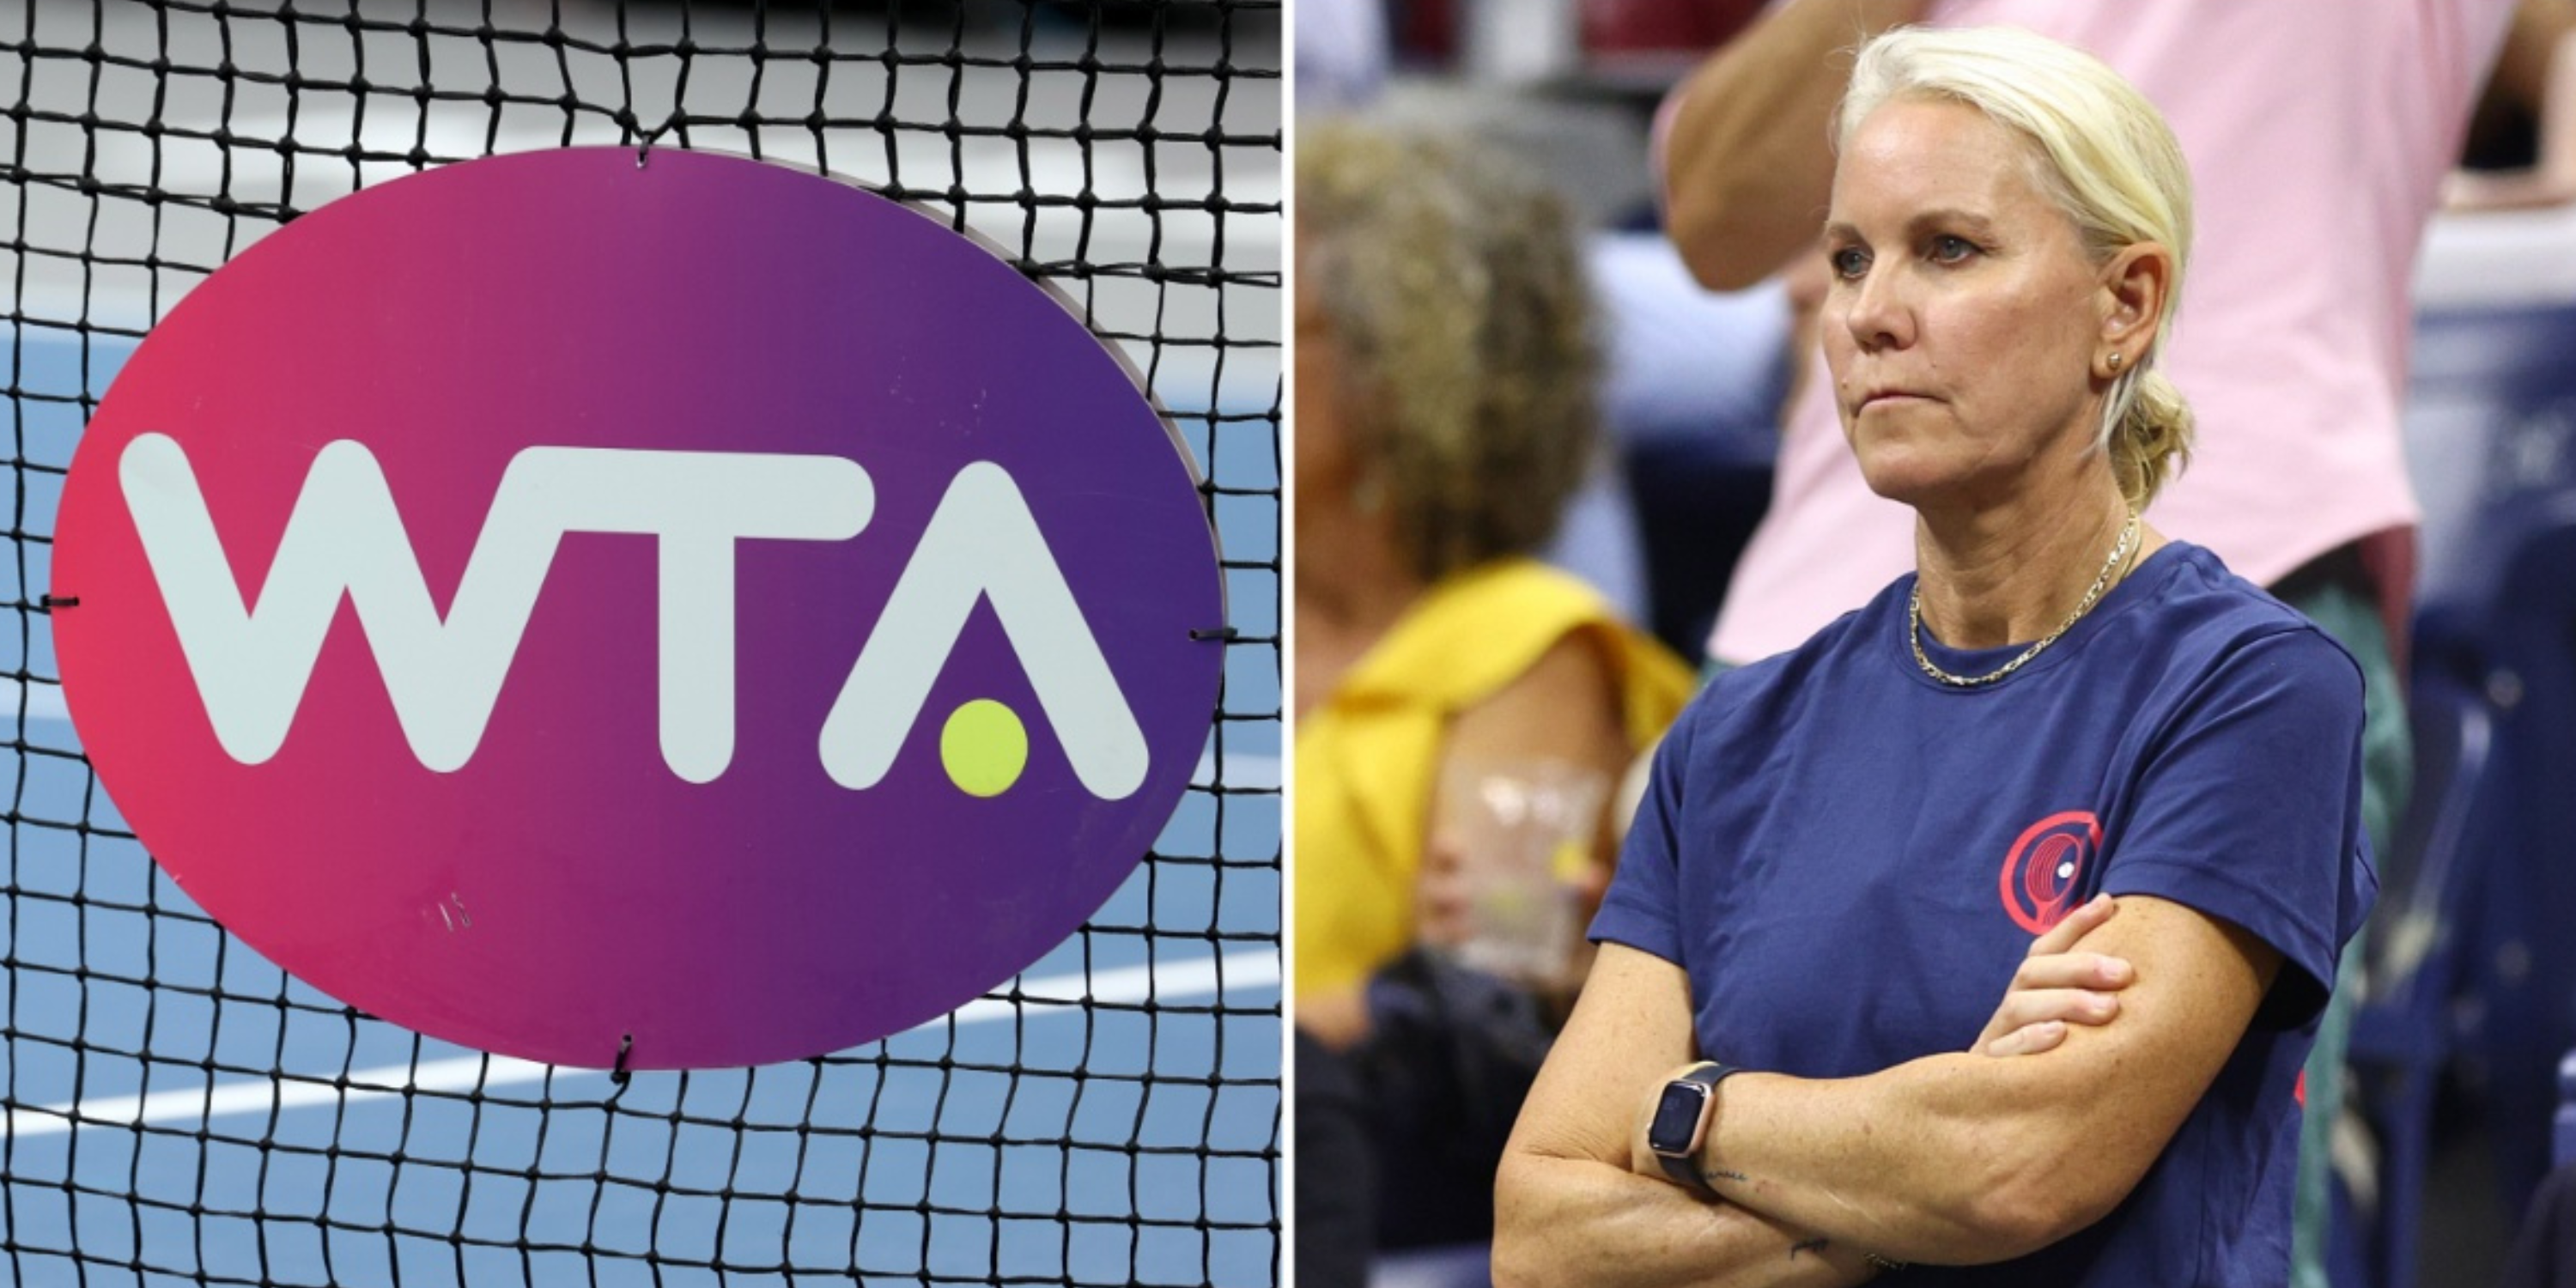 Coach criticises Women’s Tennis Association over Madrid Open controversy